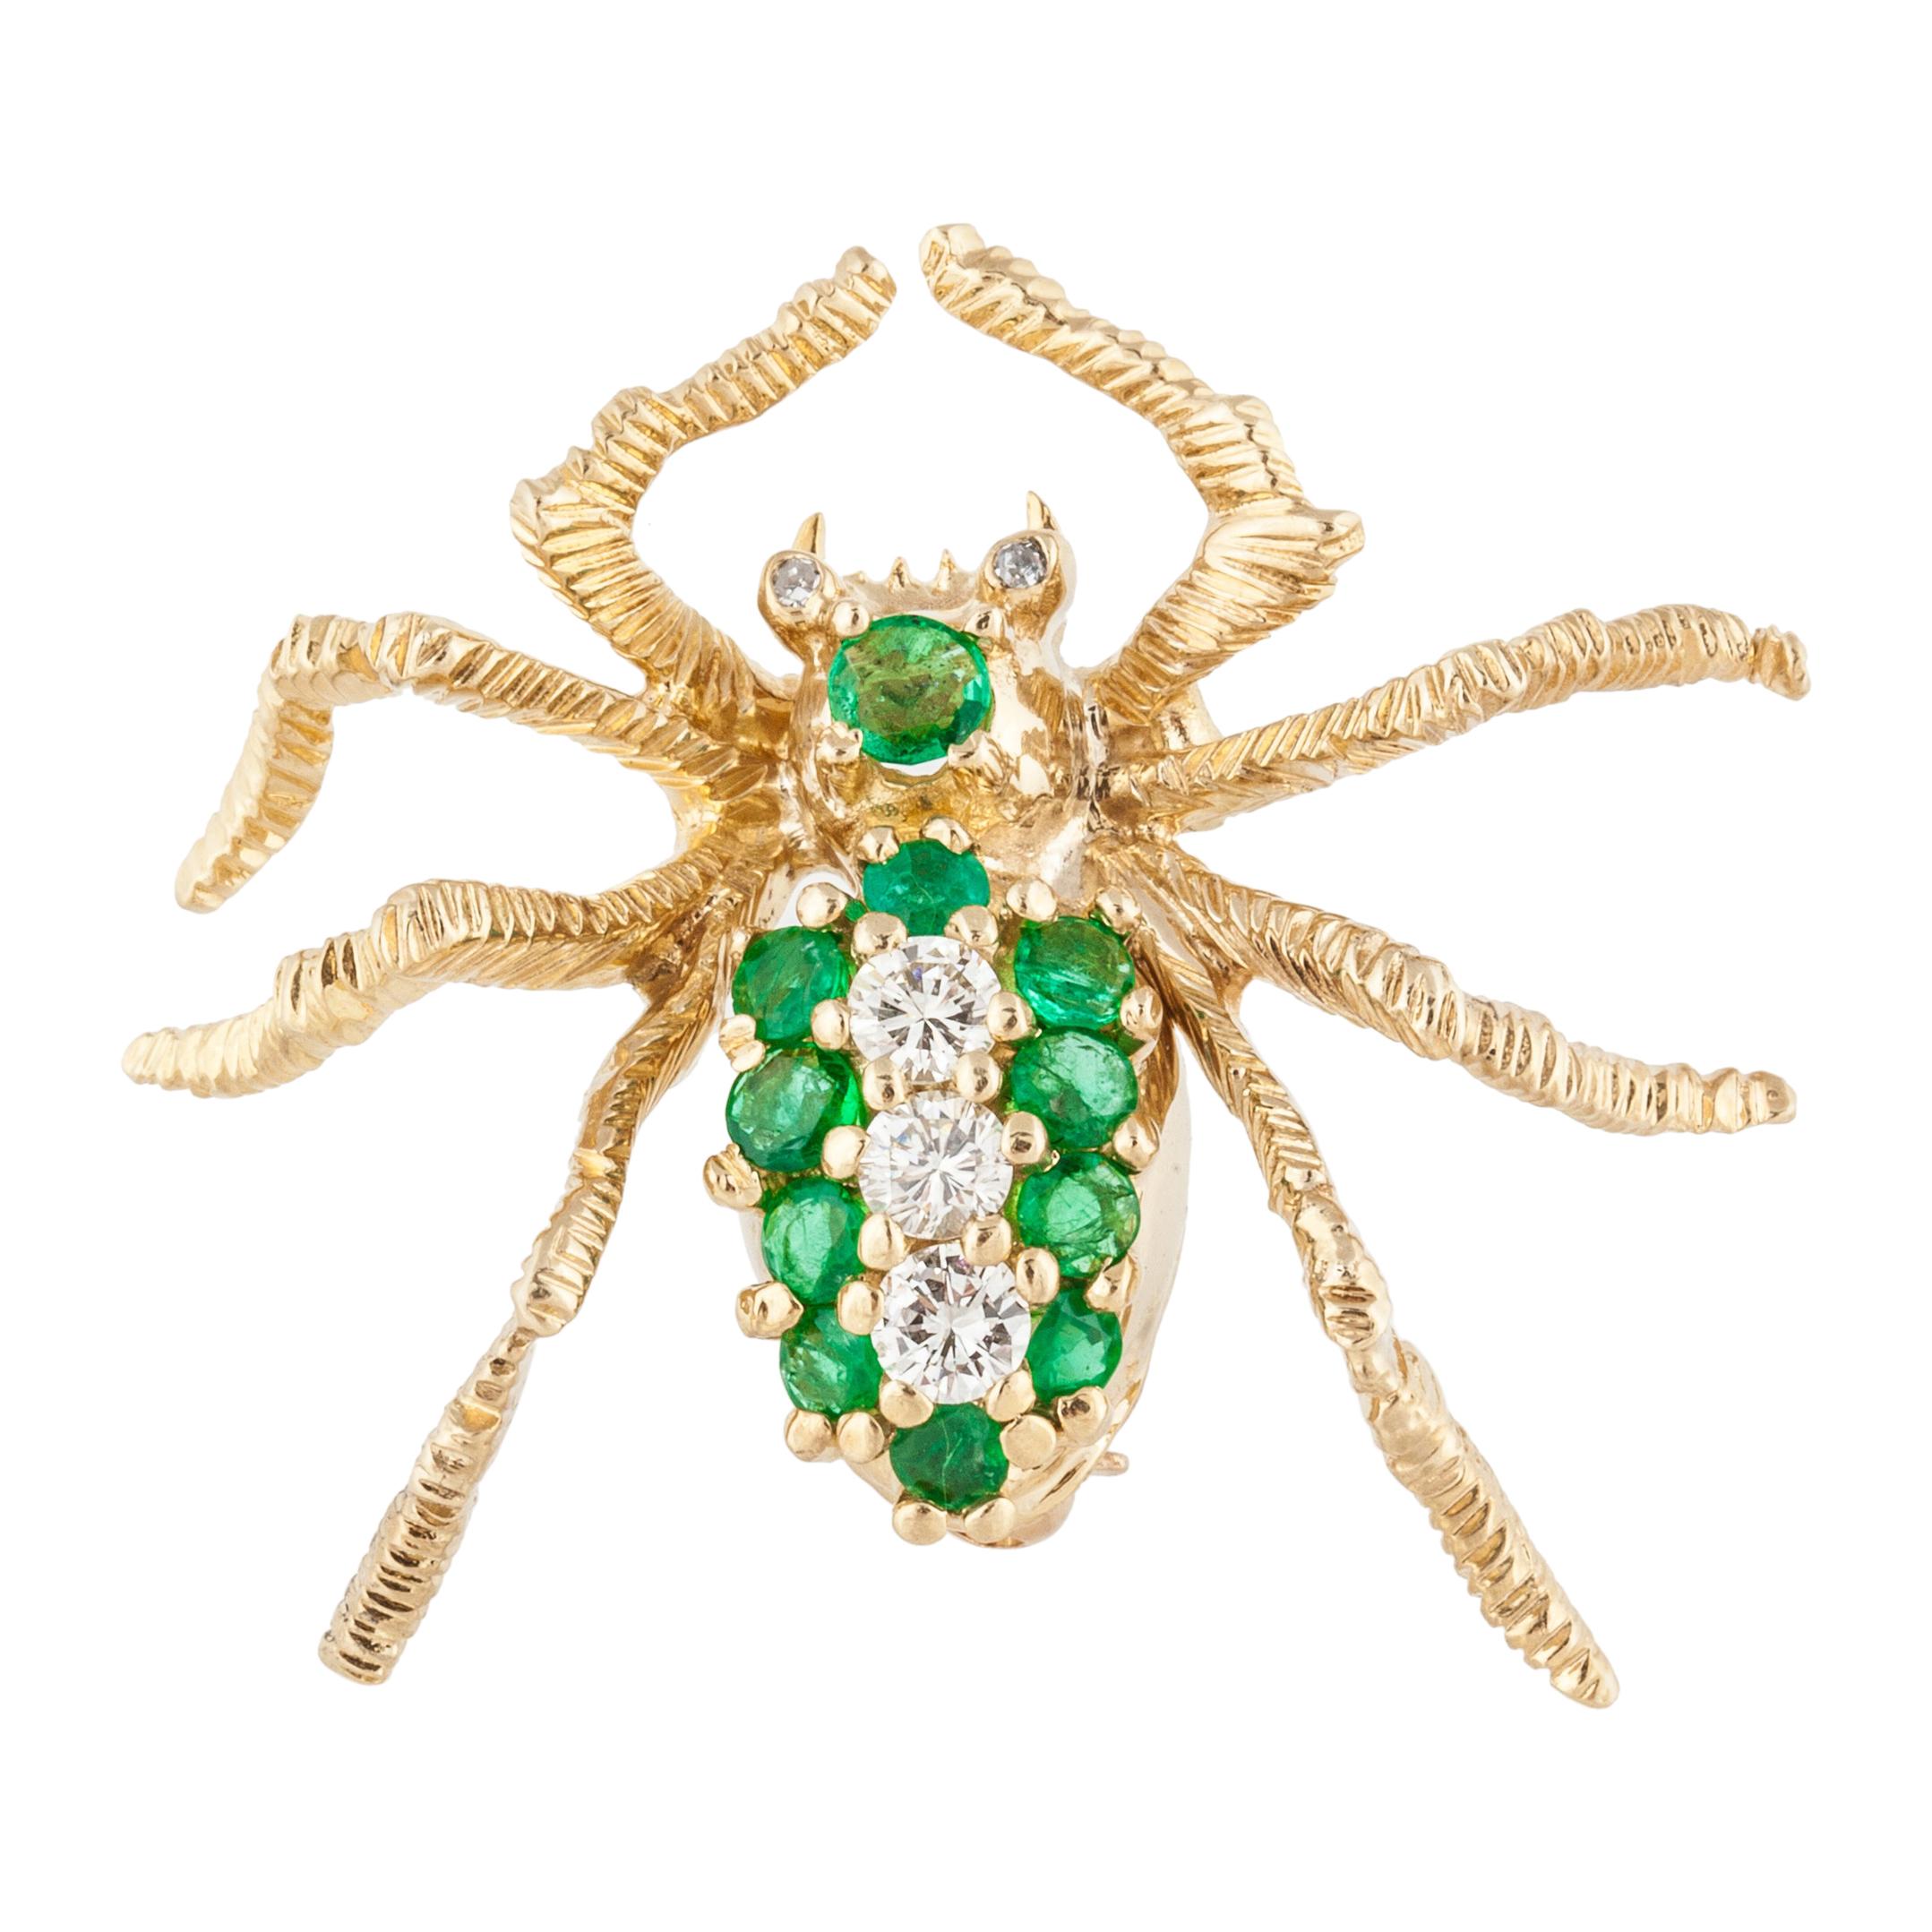 Cartier Emerald and Diamond Spider Pin in 18K Gold